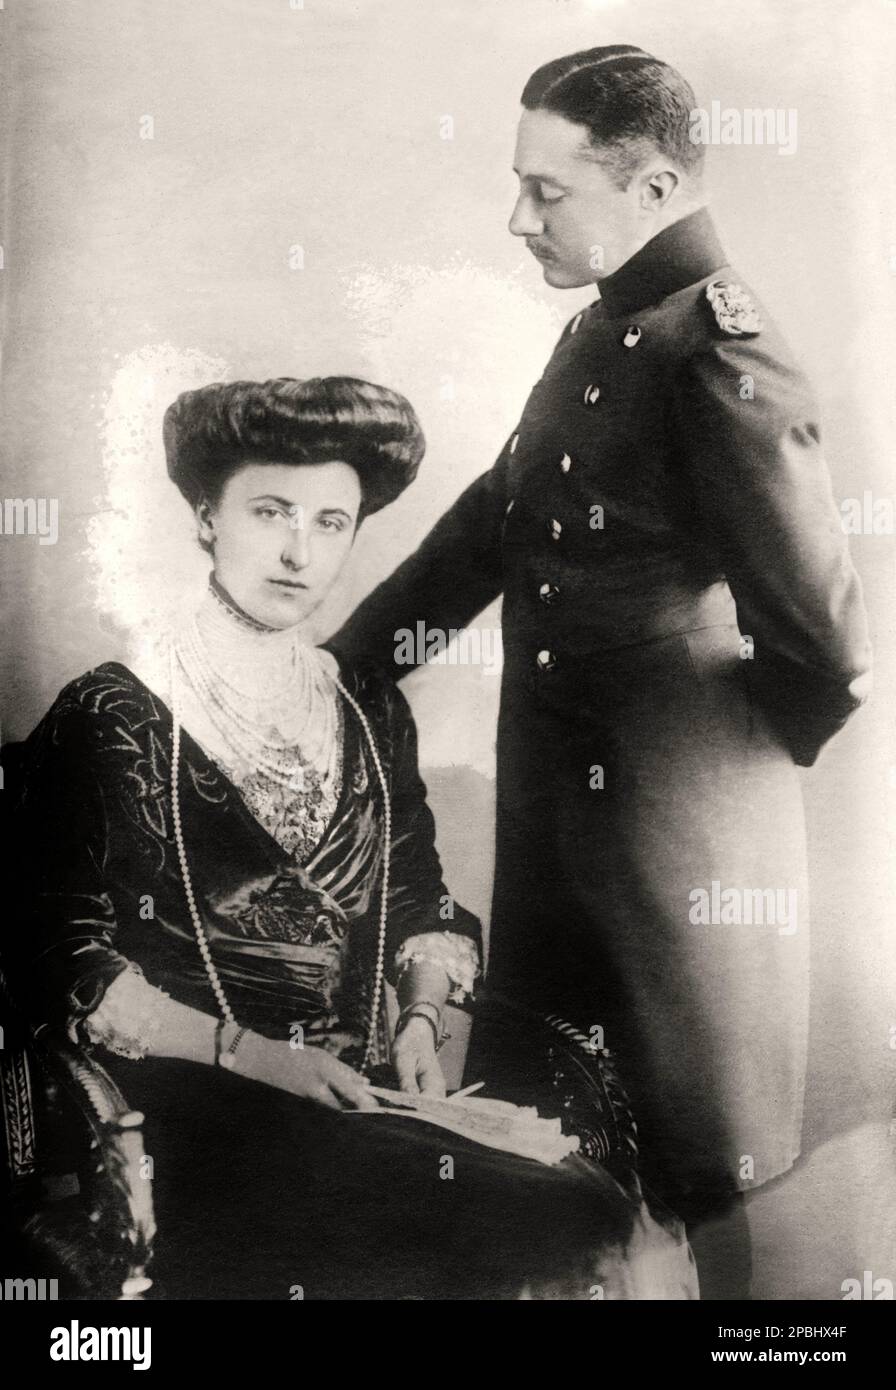 1910 ca  : The german Grand Duke WILHELM ERNST of SACHSEN  WEIMAR EISENACH  ( 1876 - 1923 ) with wife Feodora of Saxe-Meiigen .  He was born in Weimar, the eldest son of Karl August of Saxe-Weimar-Eisenach ( 1844 - 1894 ), the Hereditary Grand Duke, and his wife Pauline of Saxe-Weimar-Eisenach ( a distant cousins ) . Wilhelm Ernst succeeded his grandfather Karl Alexander as Grand Duke on 5 January 1901 as his father had predeceased him. Wilhelm Ernst created the new Weimar state with the direction of Hans Olde, Henry van de Velde and Adolf Brutt. Also, he renewed the University of Jena by Theo Stock Photo